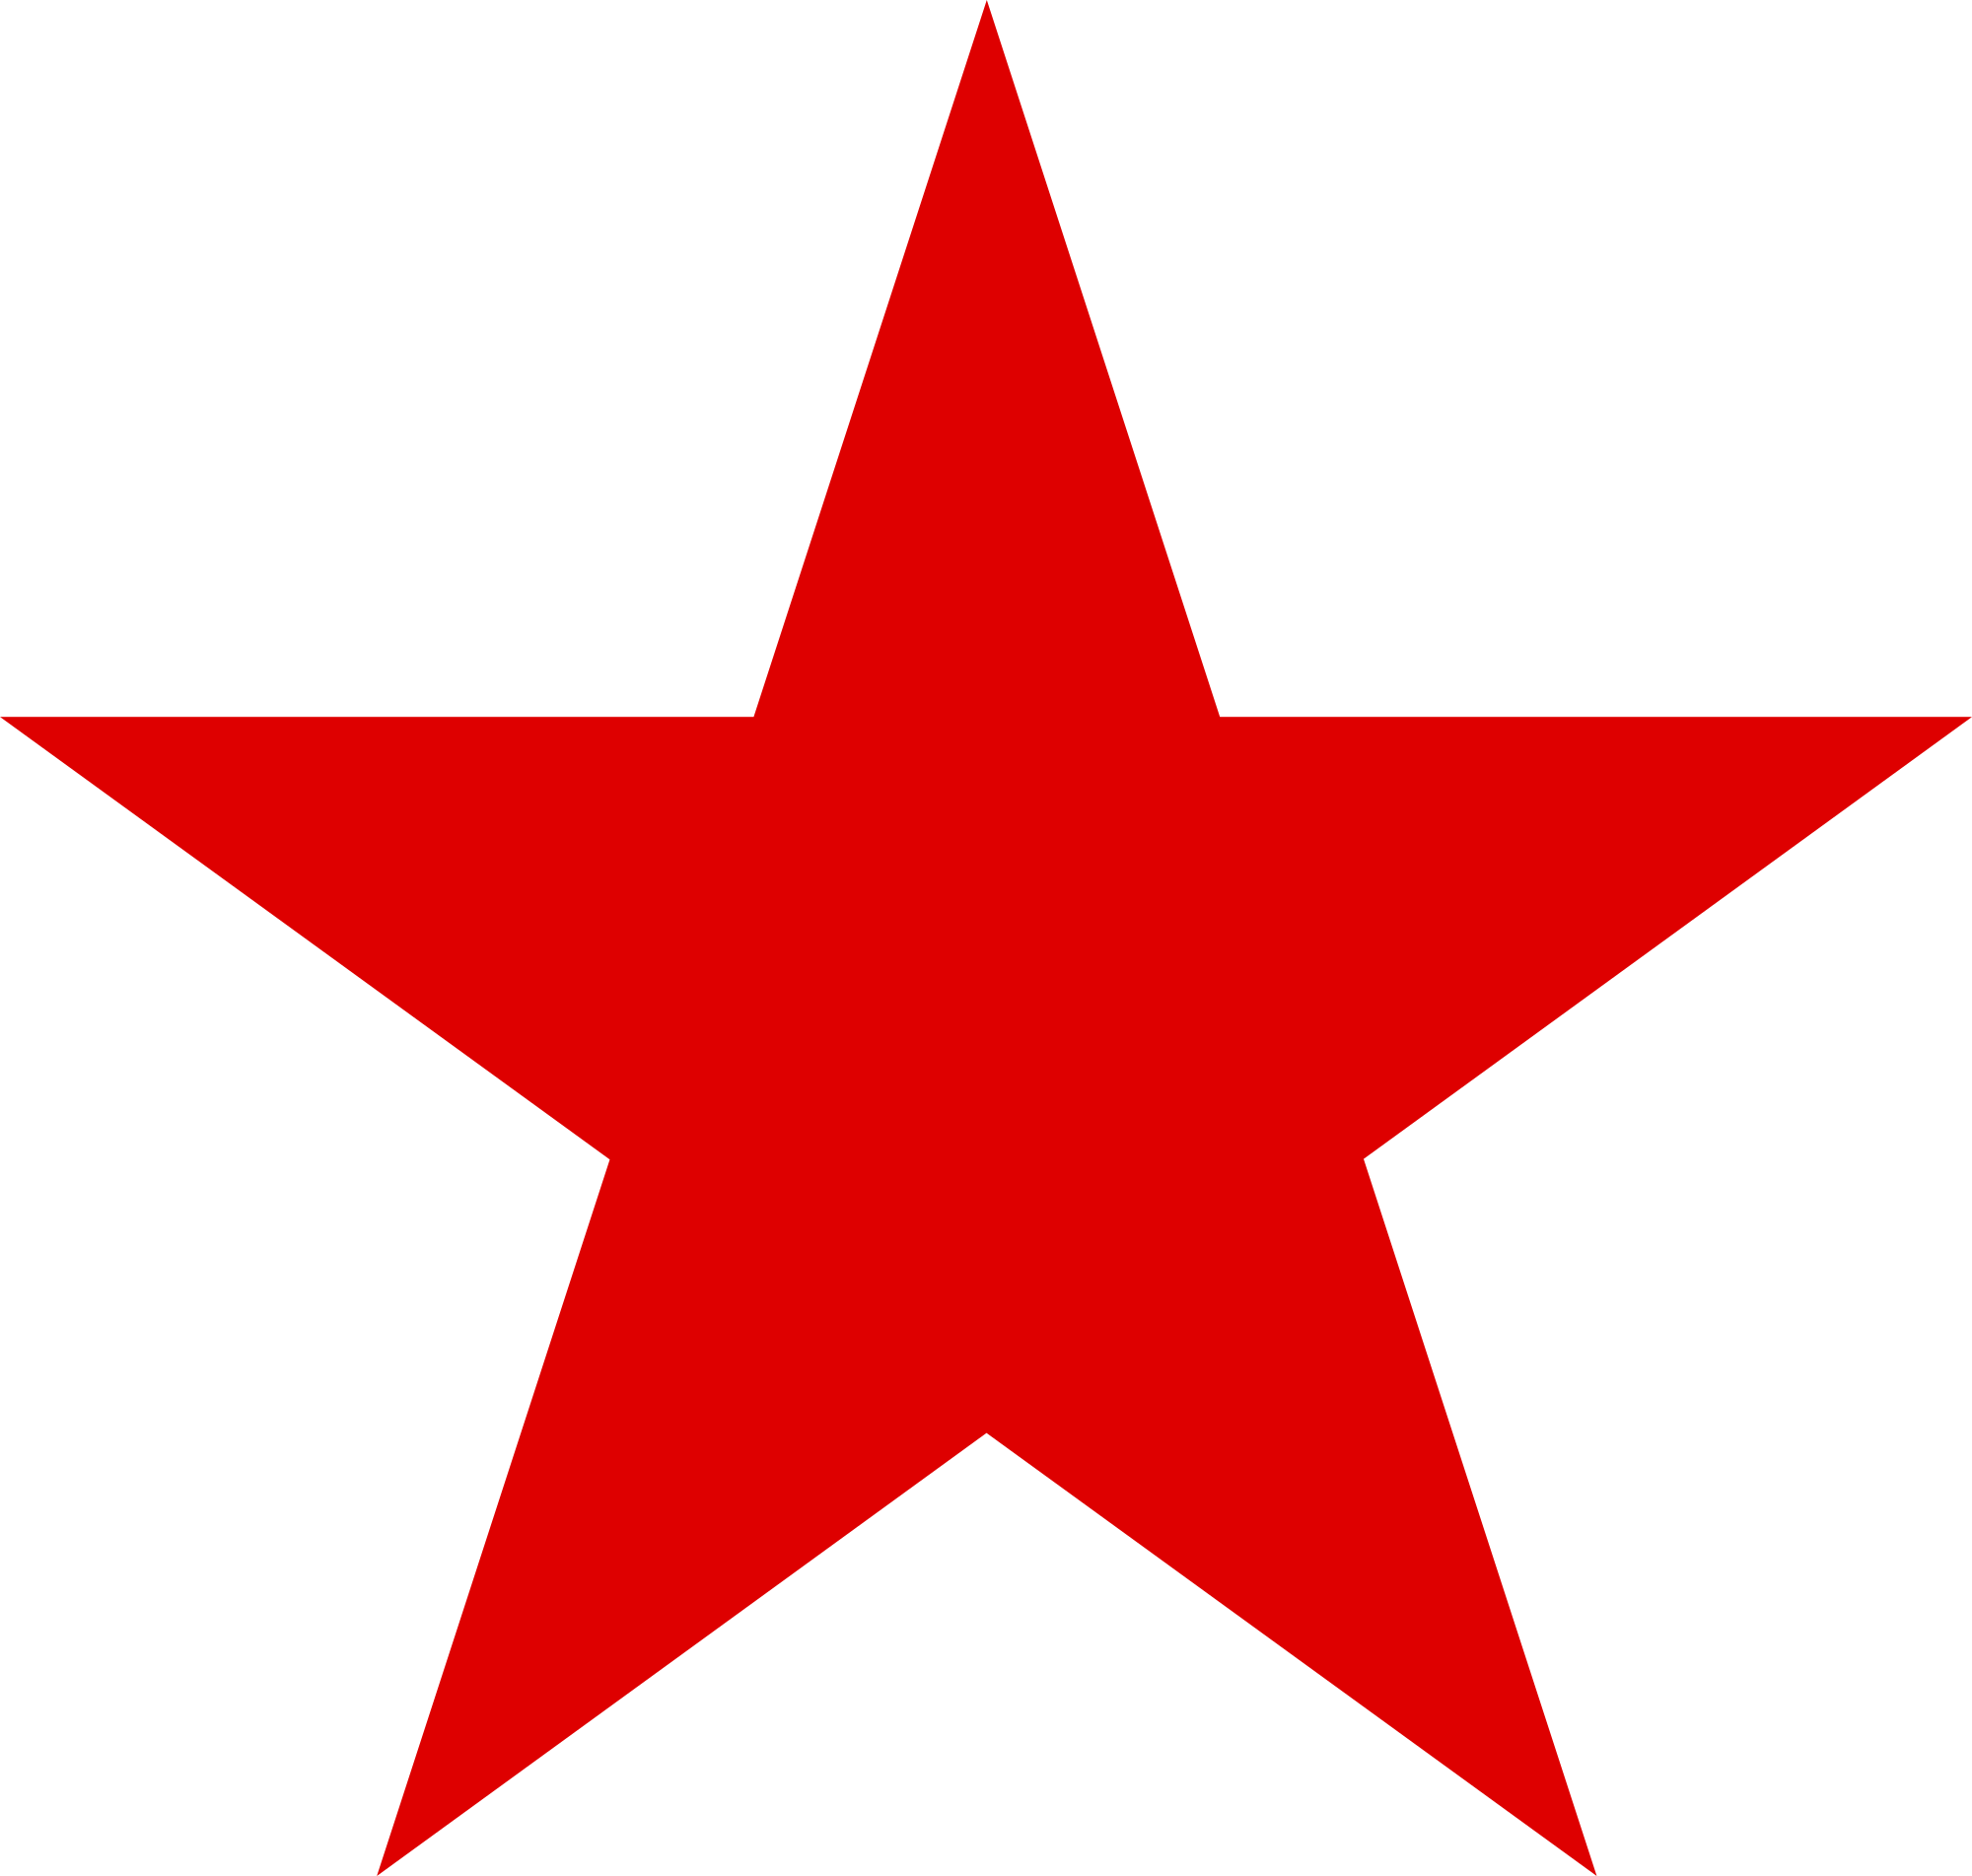 White Background with Red M Logo - Red star